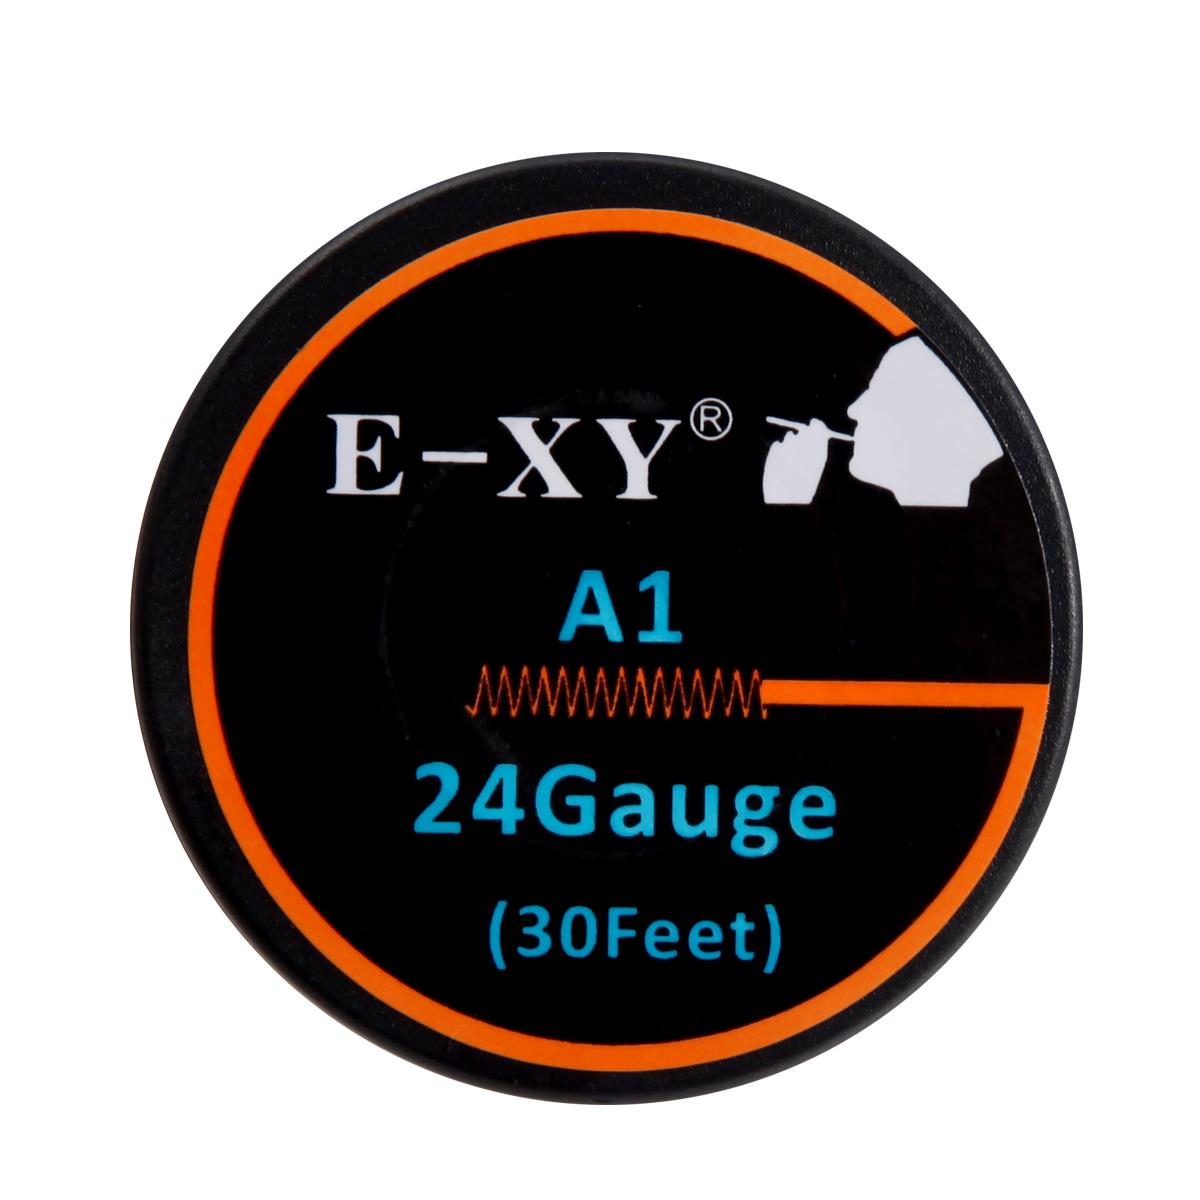 E-XY Kanthal A1 Heating Wire 30Feet for RDTA RTA RDA RBA Coil Building